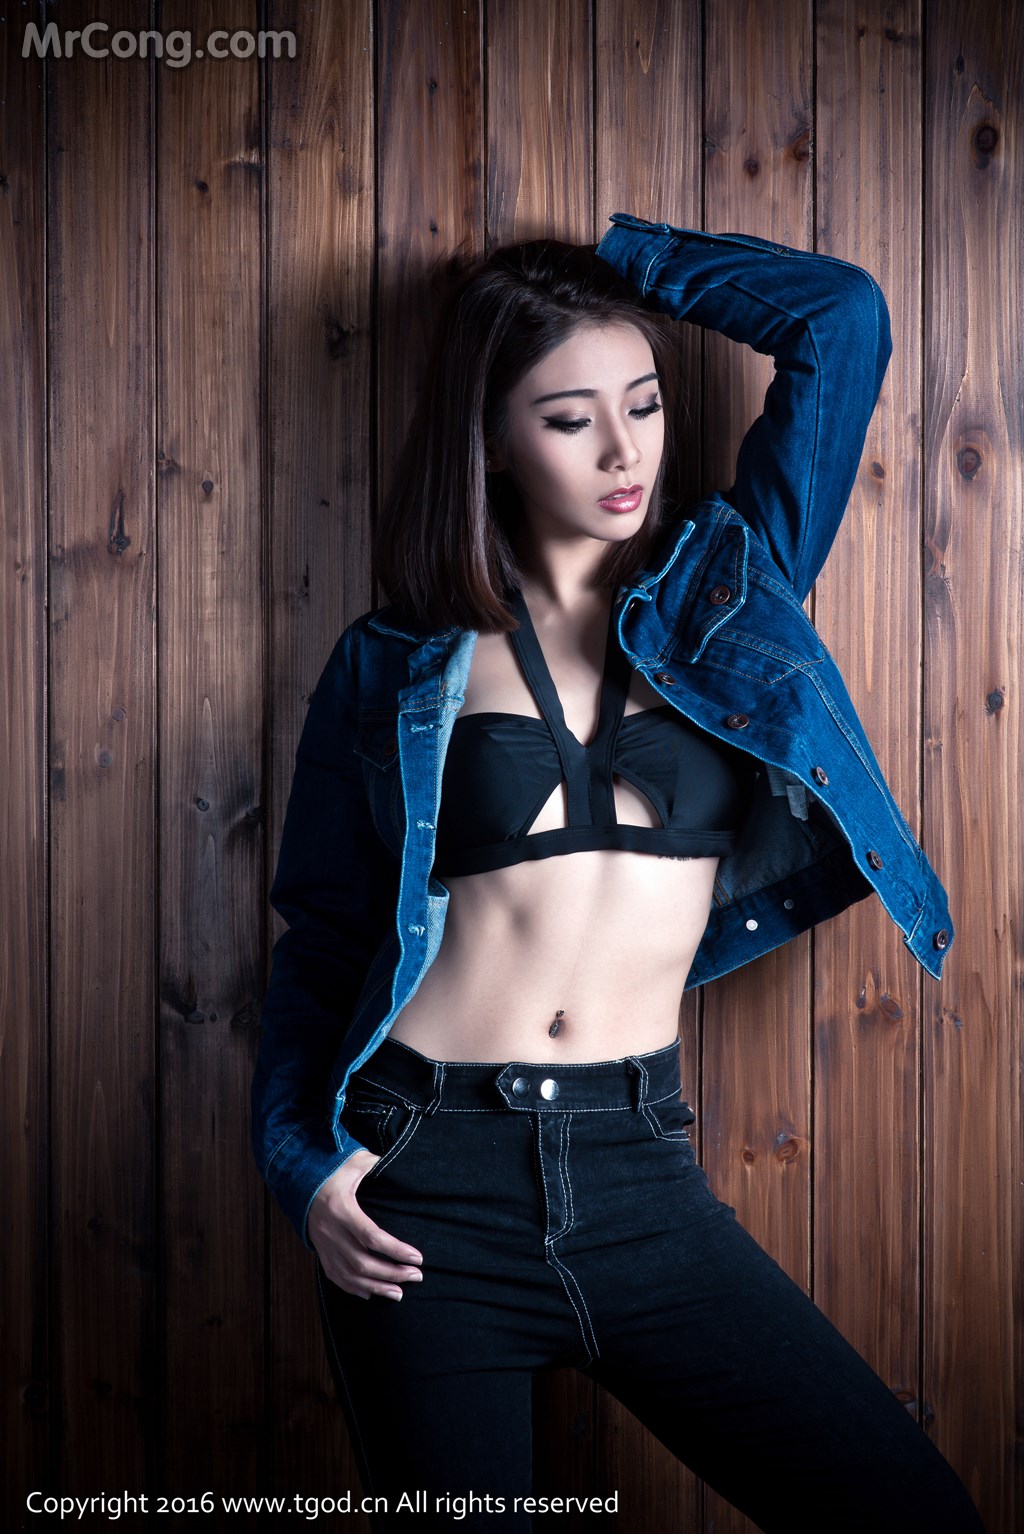 TGOD 2016-02-19: Model Xiao Tang (Lee 小 棠) (66 pictures) photo 3-4